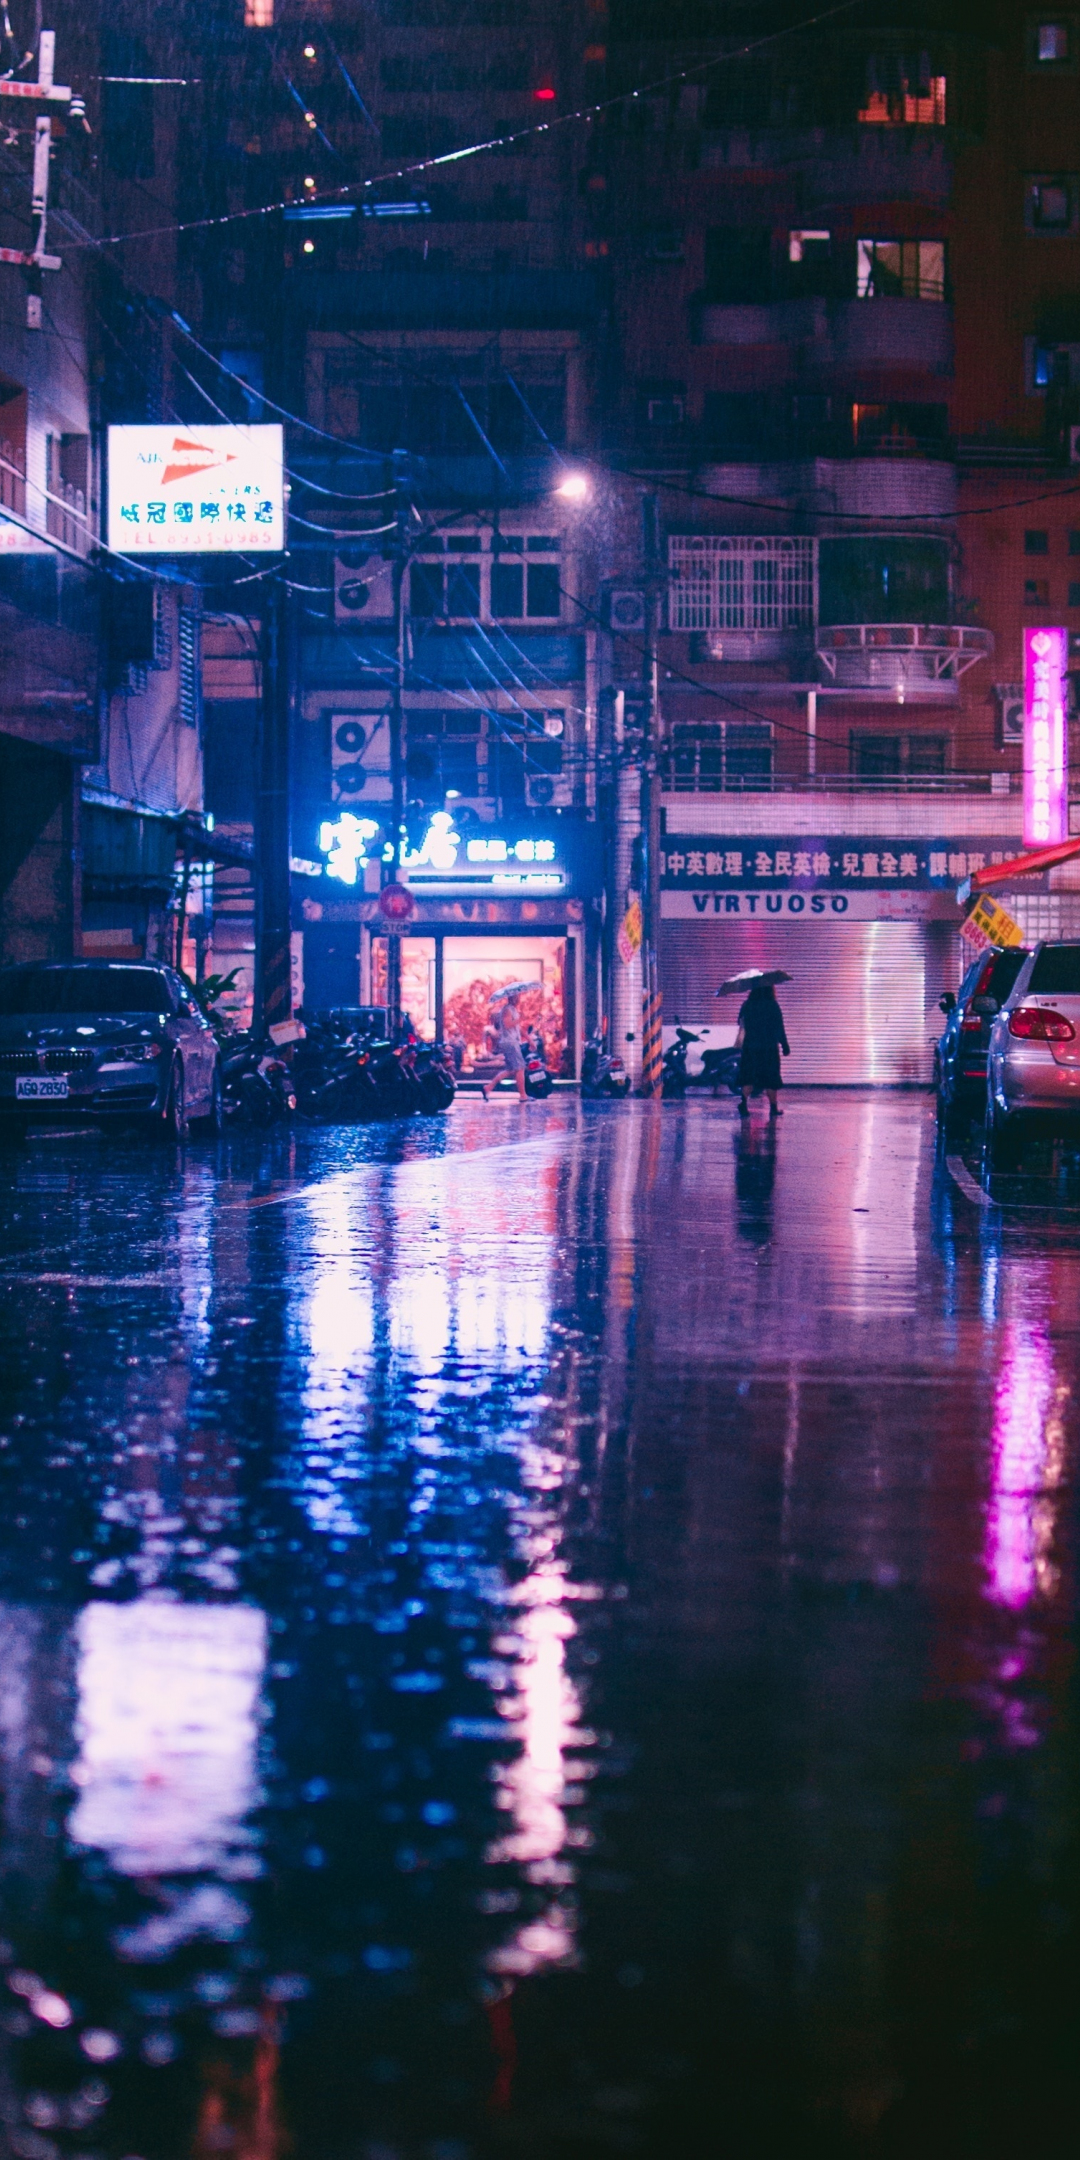 Download rain, lights, city street, reflections 1080x2160 wallpaper, honor 7x, honor 9 lite, honor view 1080x2160 HD image, background, 18959